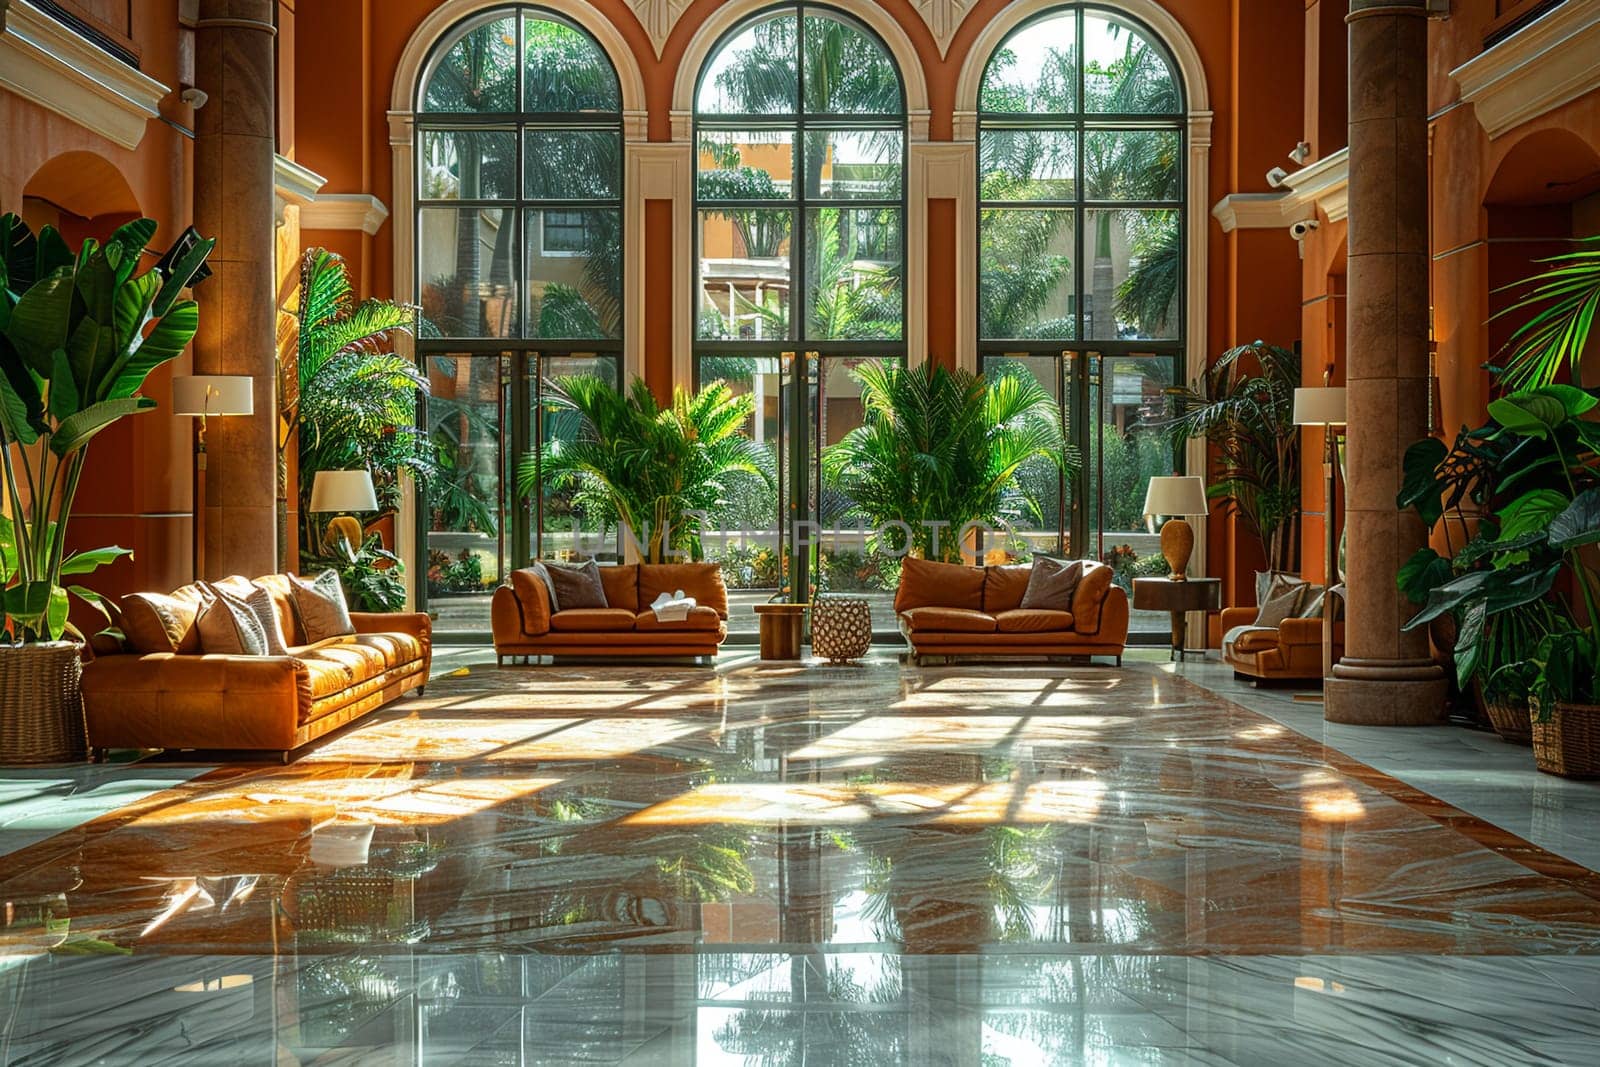 Lavish hotel lobby with marble floors, lush plants, and comfortable seating areas